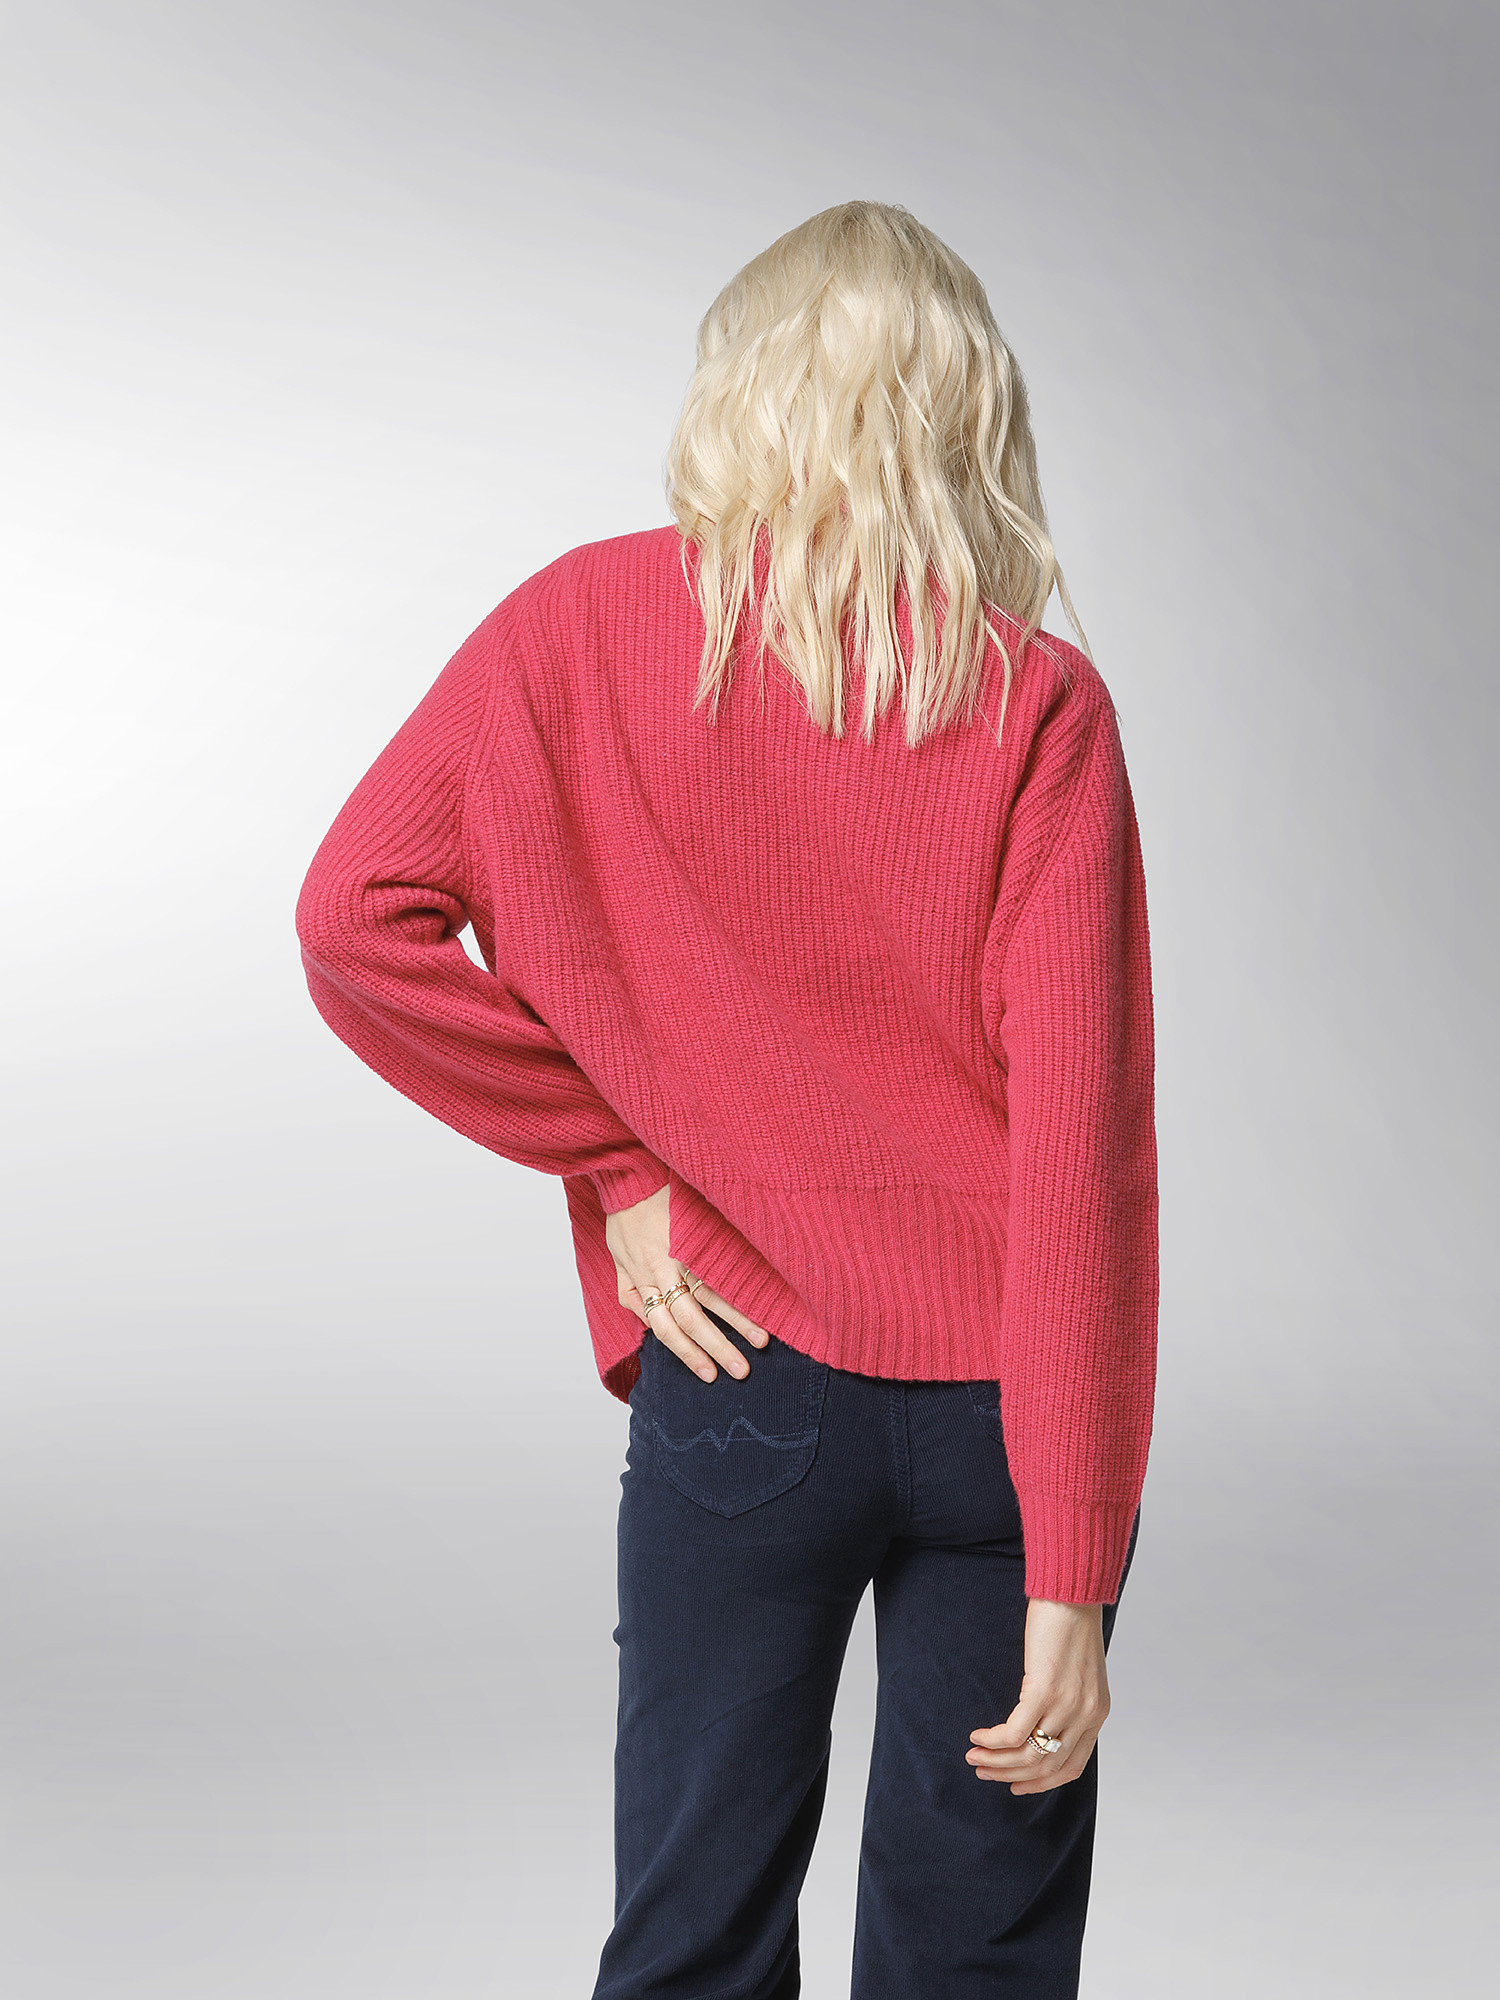 K Collection - Carded wool turtleneck pullover, Pink Fuchsia, large image number 6